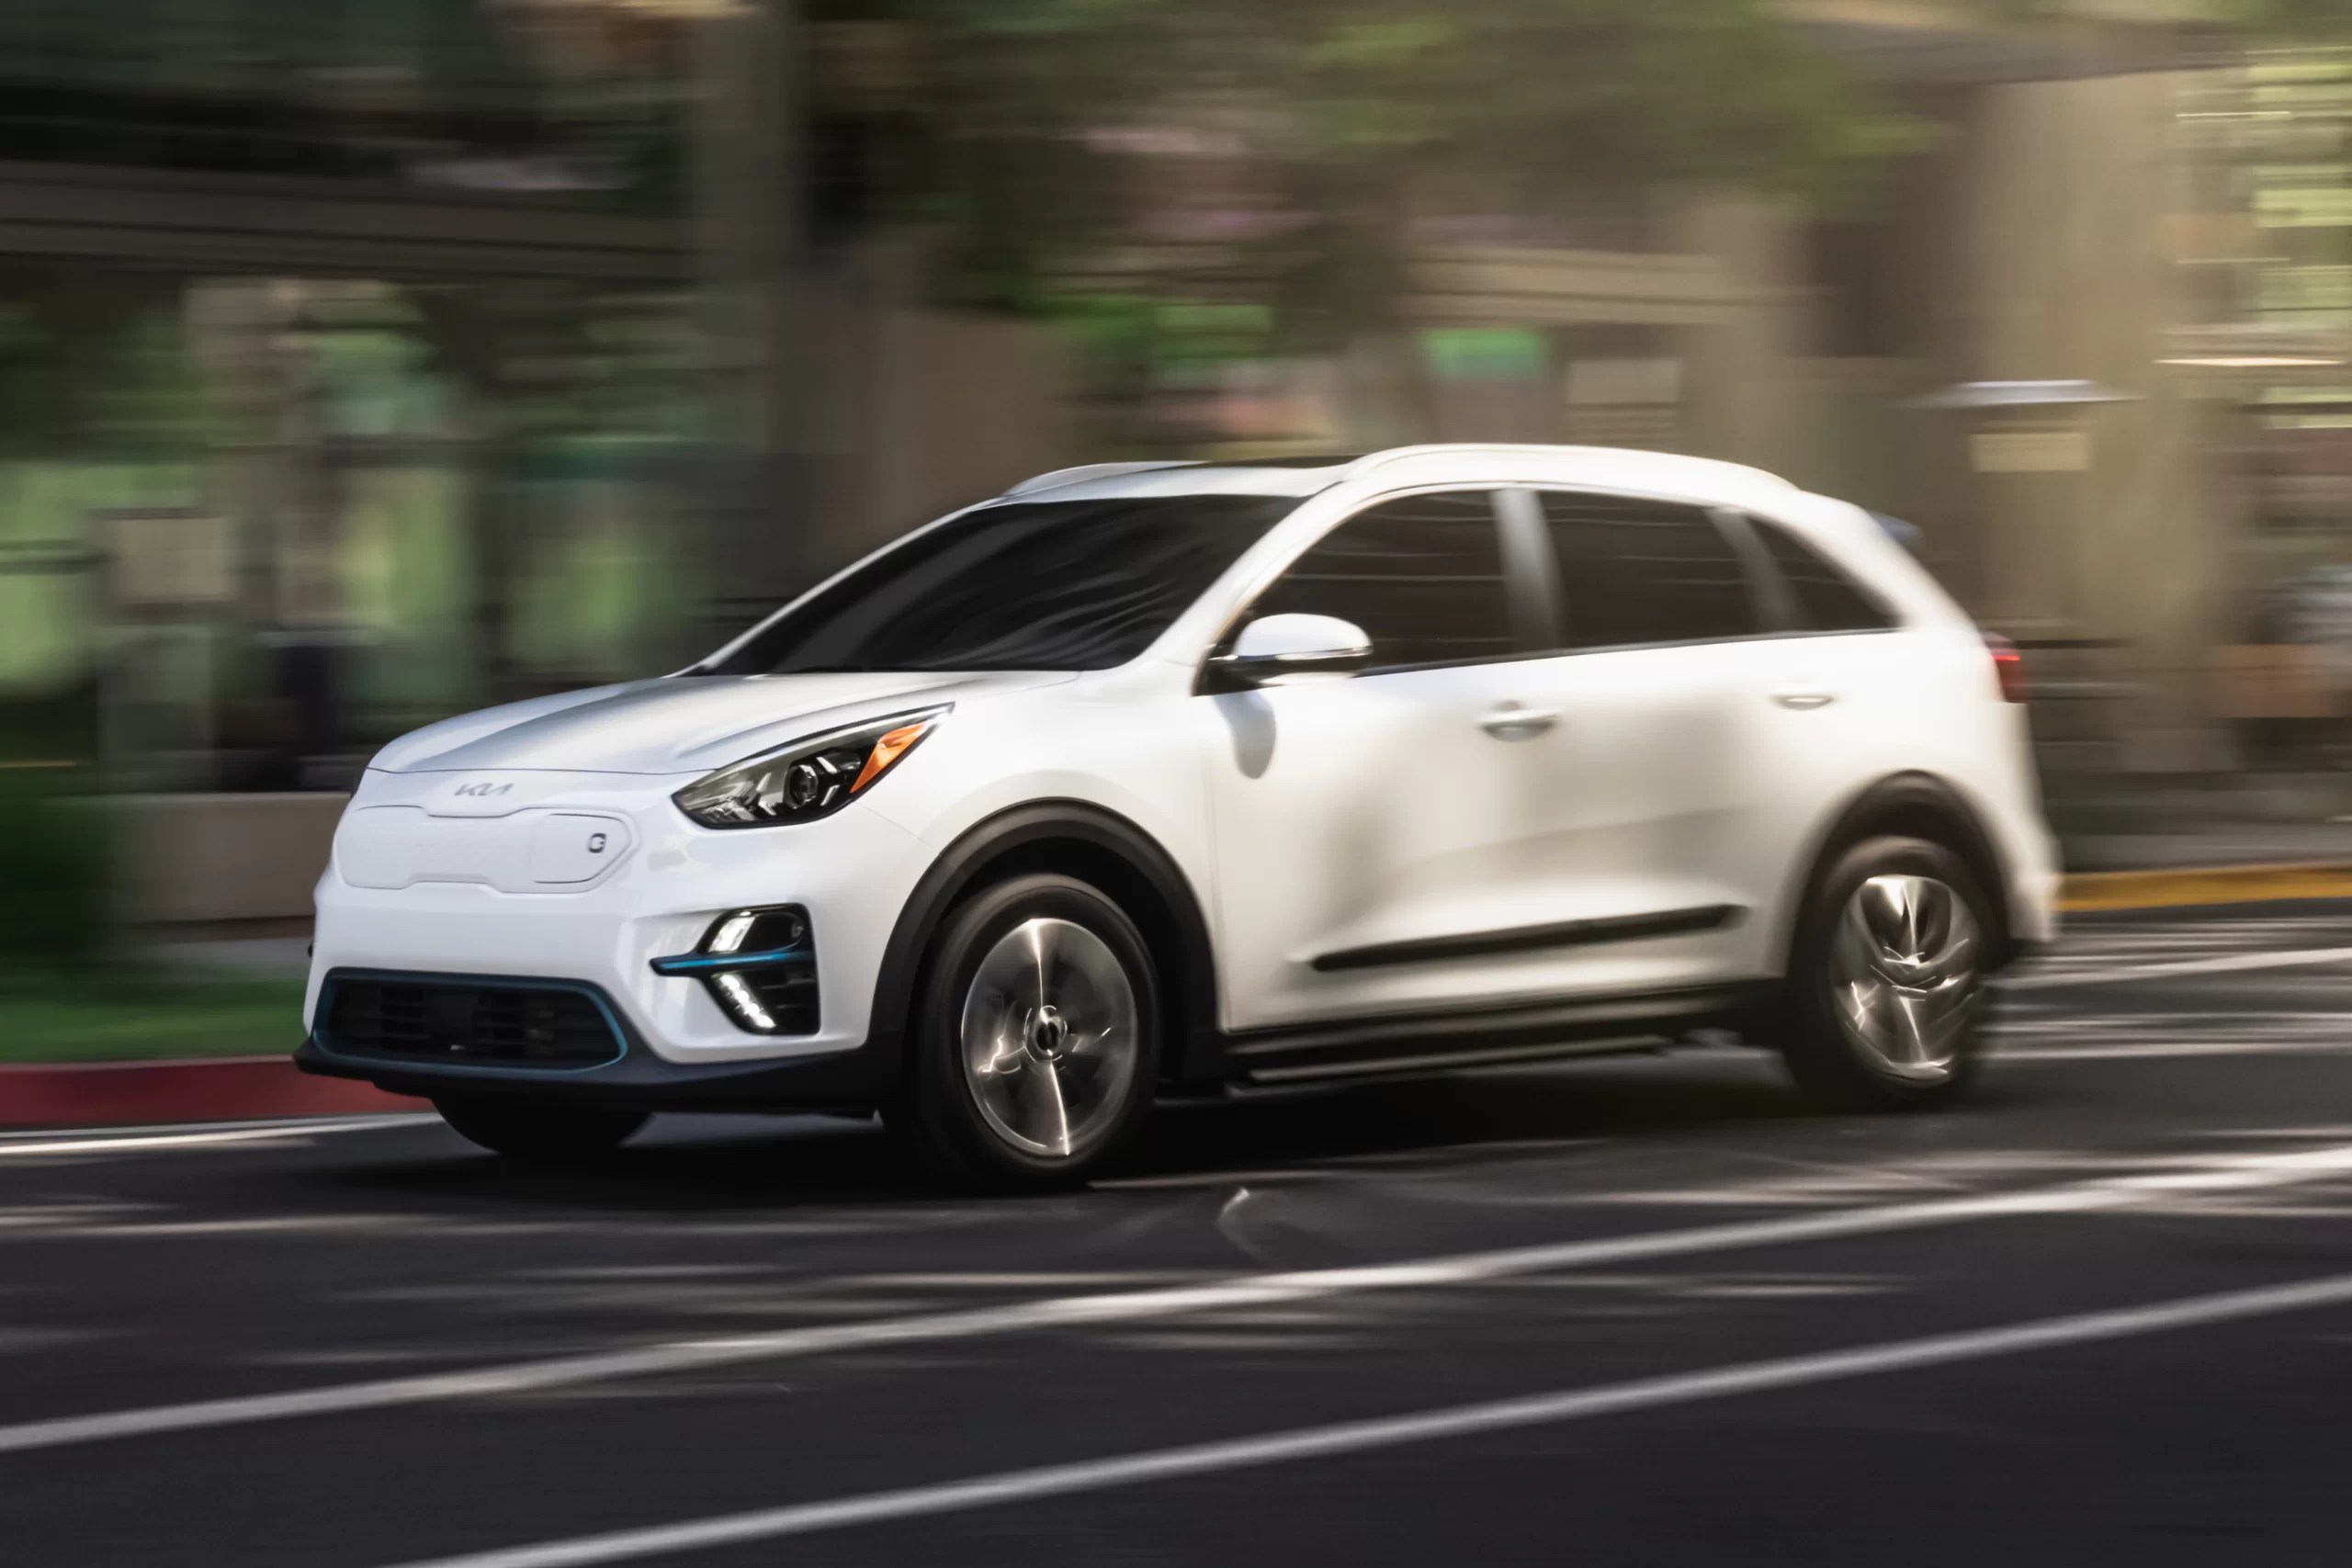 The Kia Niro EV is an SUV that offers the benefits of an all-electric vehicle.